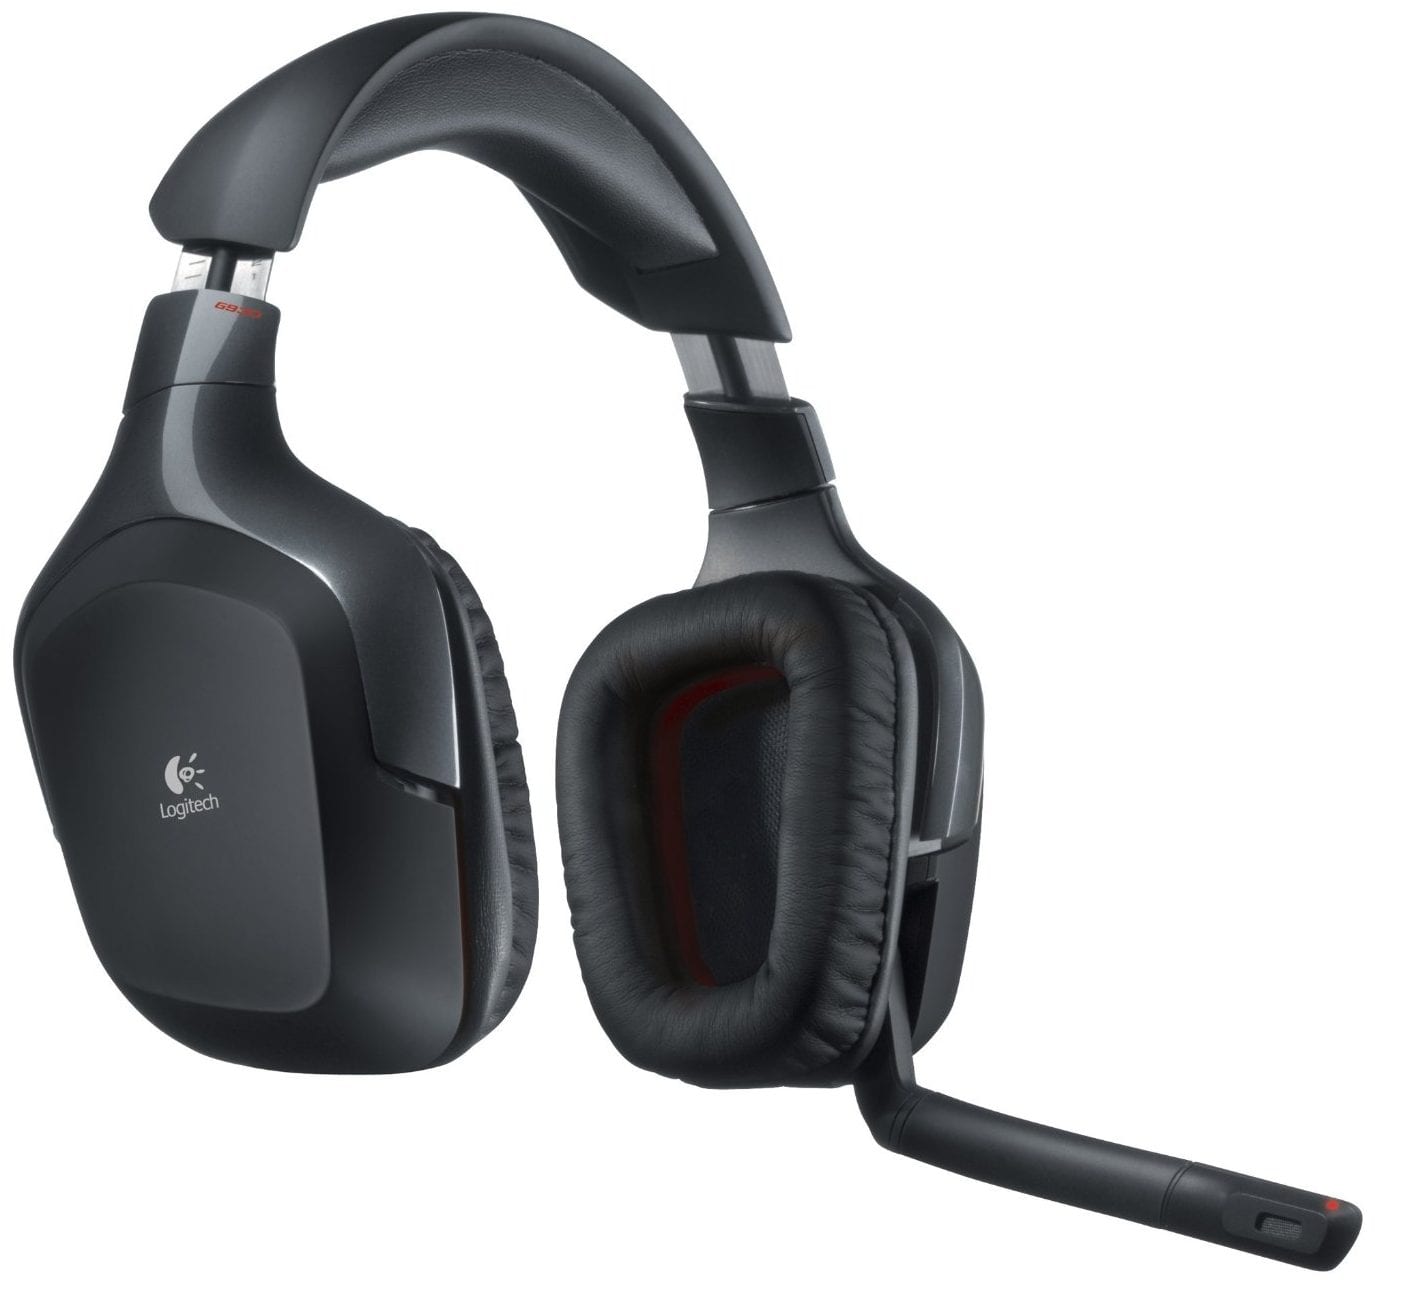 Logitch Cheap Wireless Gaming Headset 2017 Review